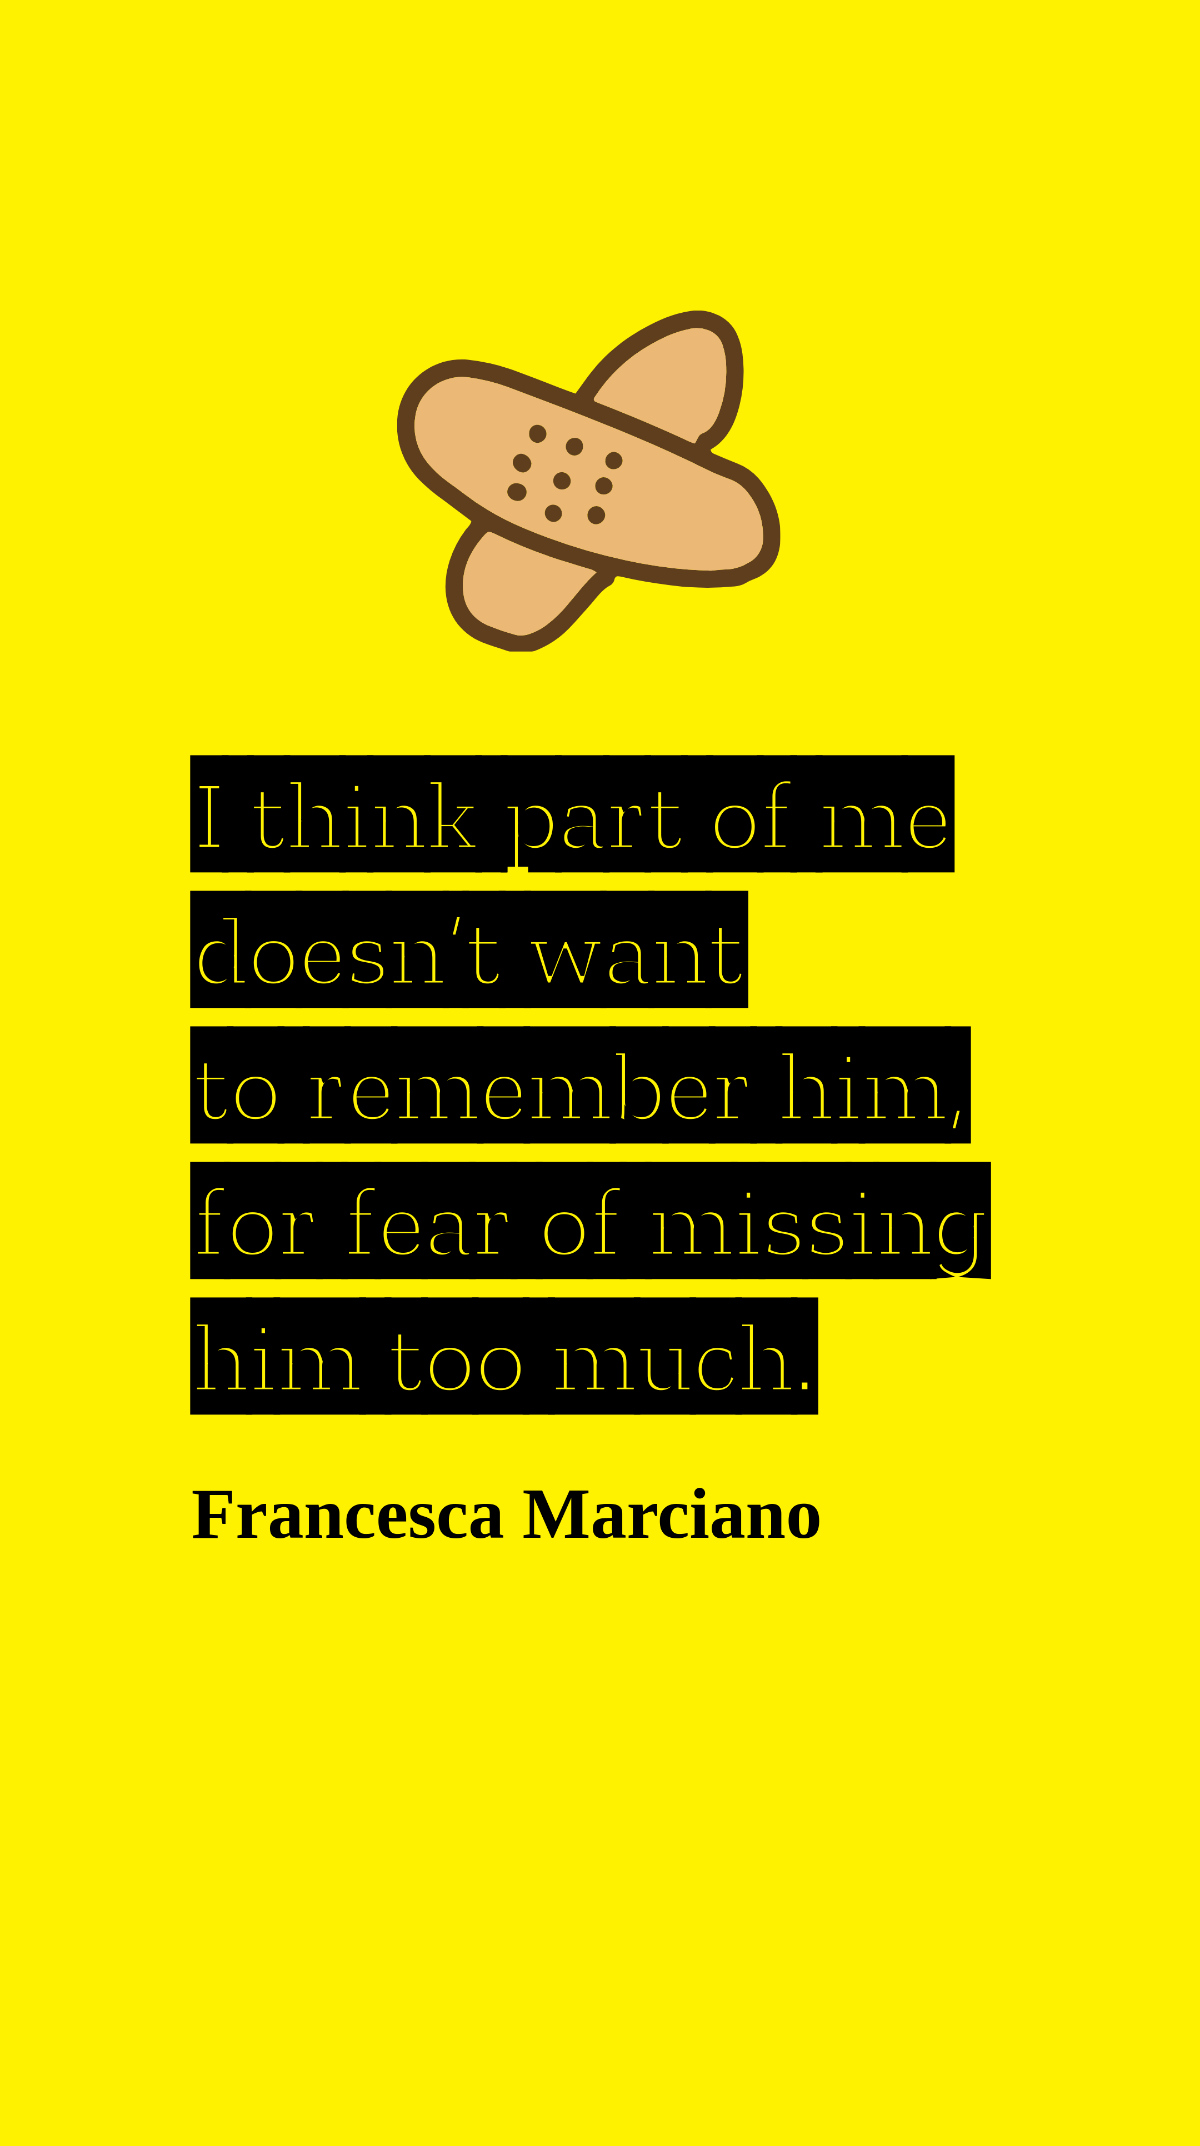 Francesca Marciano - I think part of me doesn’t want to remember him, for fear of missing him too much. Template